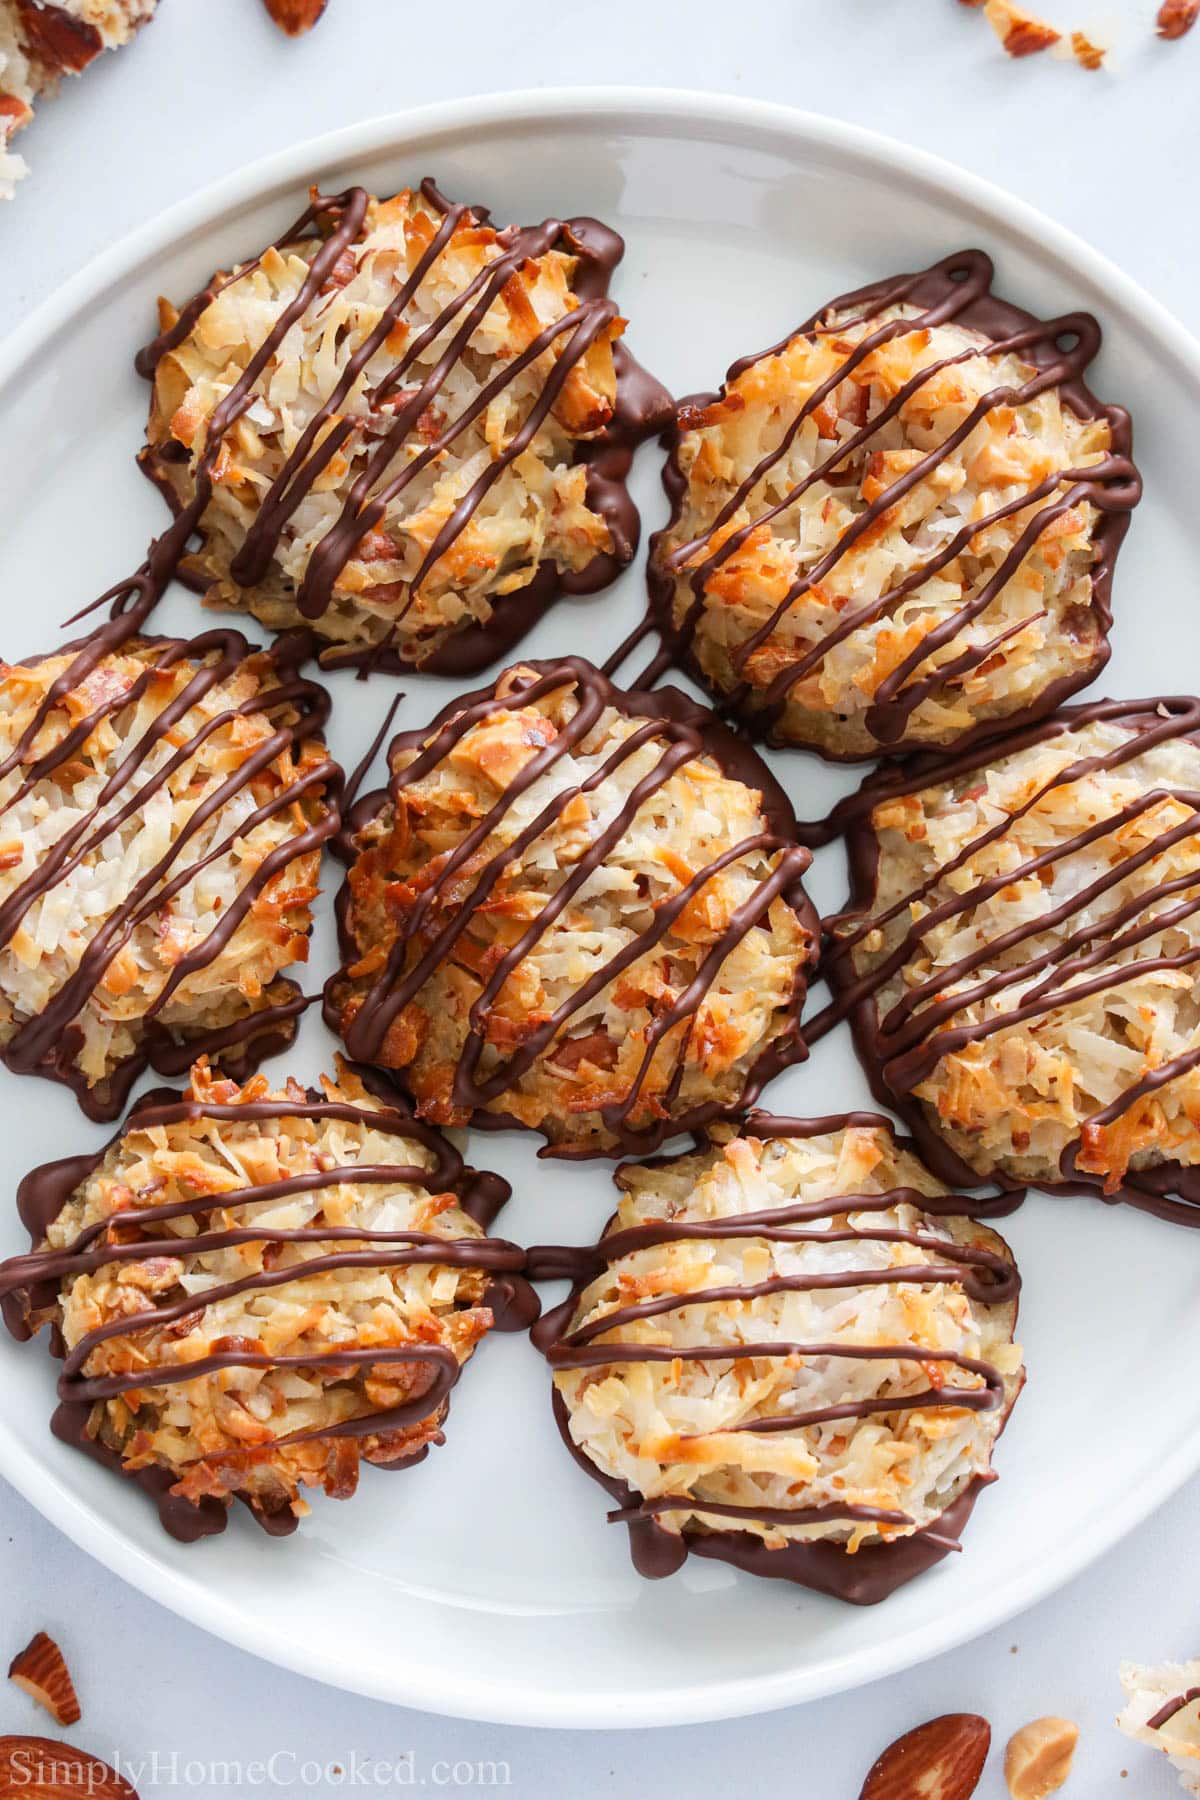 Vertical image of a plate of Almond Joy Cookies